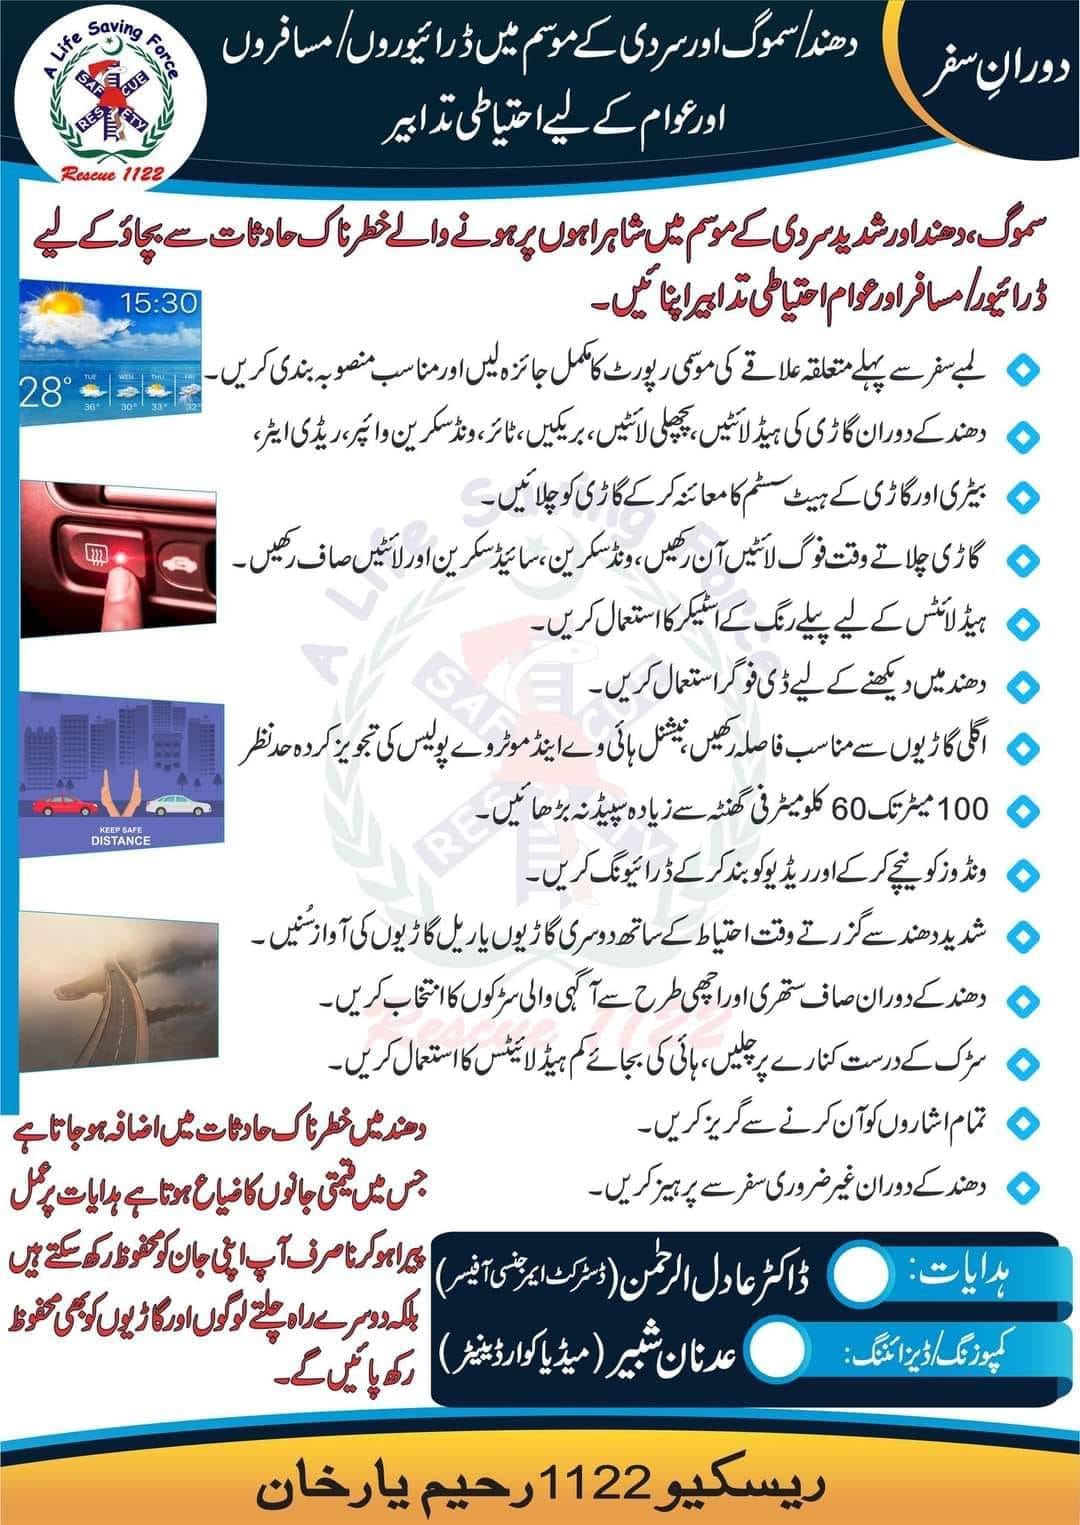 Precautionary Measures for Drivers during Fog, Smog and Cold Weather